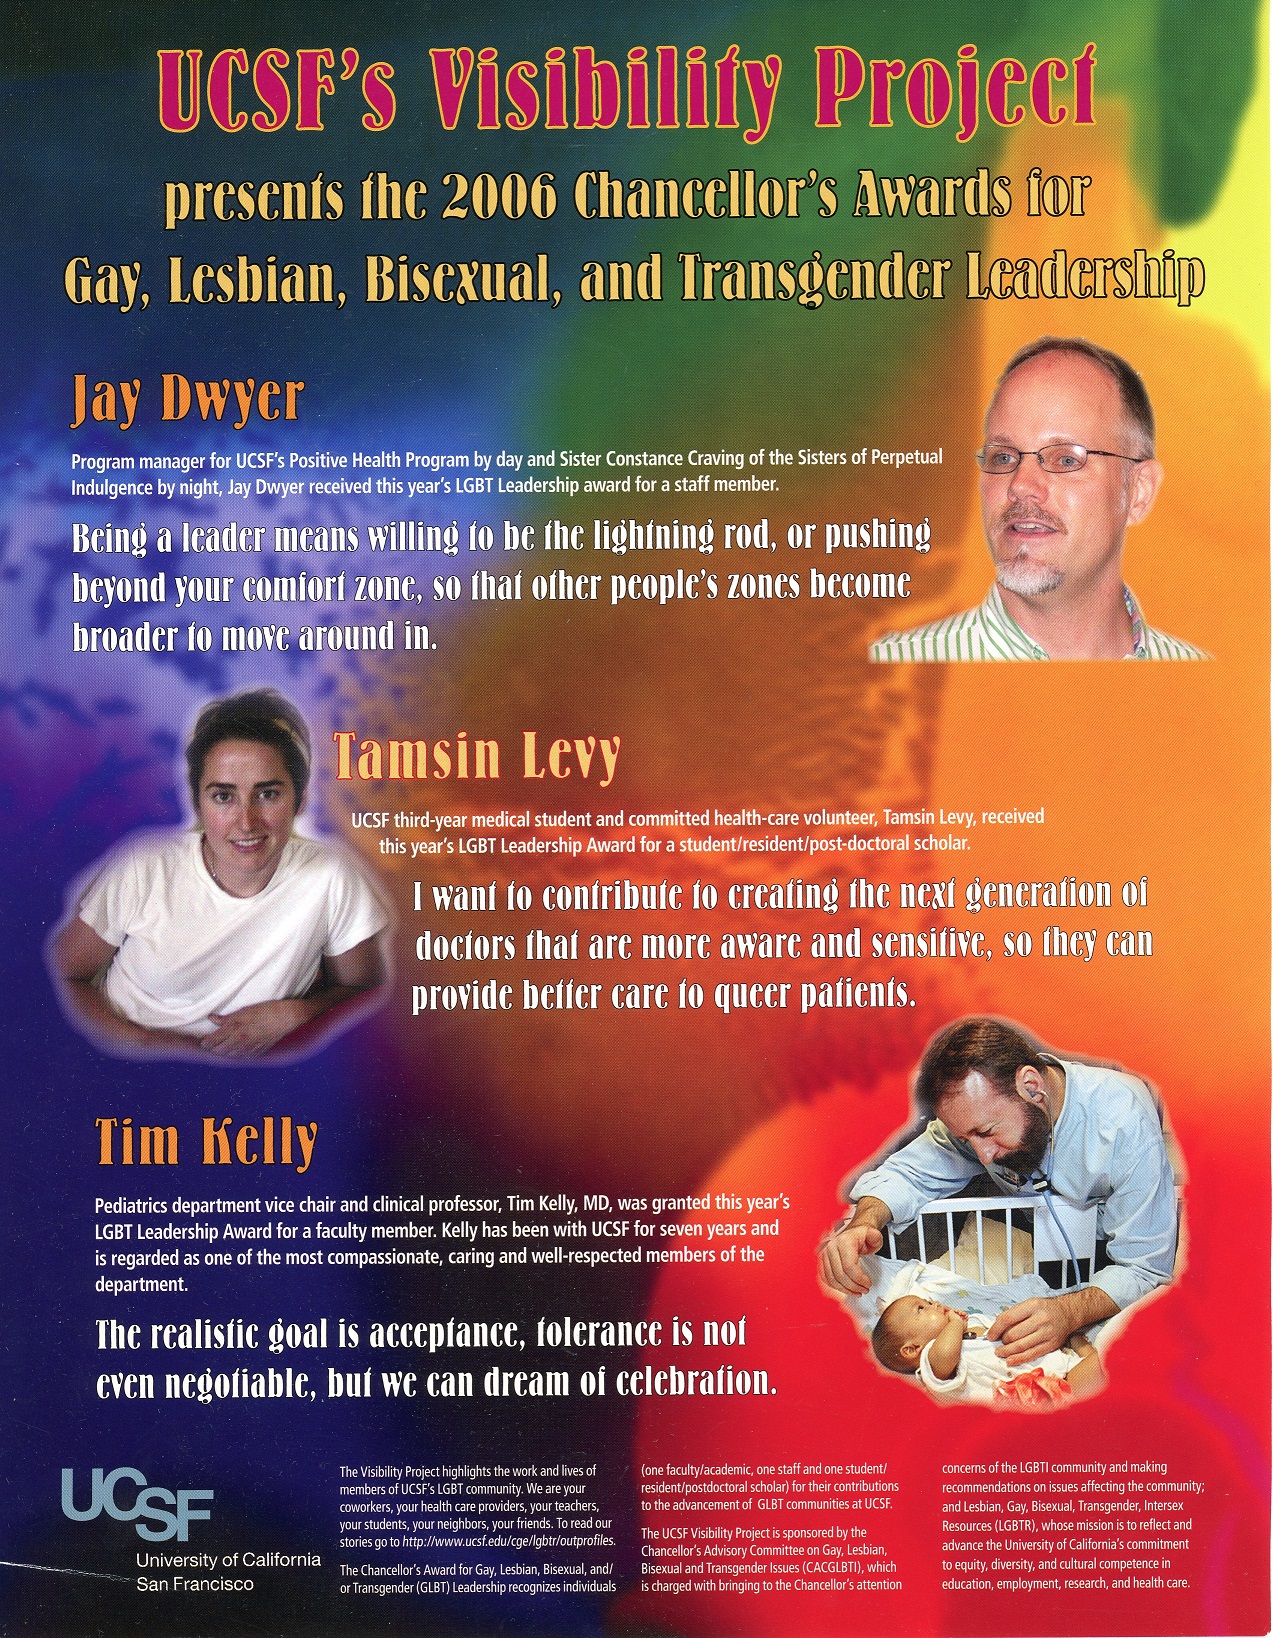 UCSF Visibility Project flyer, 2006 Chancellor's Award for Gay, Lesbian, Bisexual, and Transgender Leadership